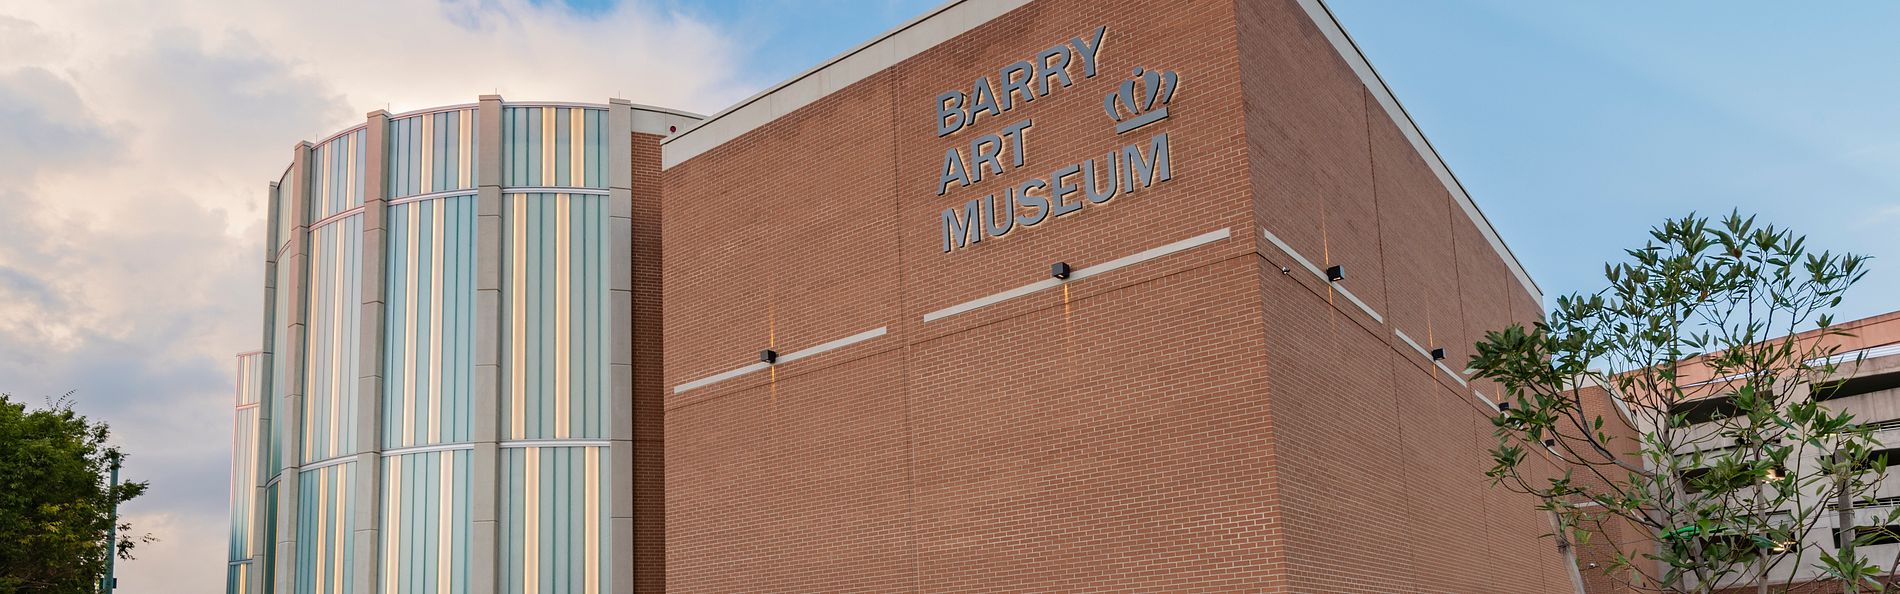 This 24,000 sq ft museum is located at the corner of Hampton Boulevard and 43rd Street, across from the Ted Constant Convocation Center, in the heart of Old Dominion University’s campus and Norfolk’s emerging Arts District.